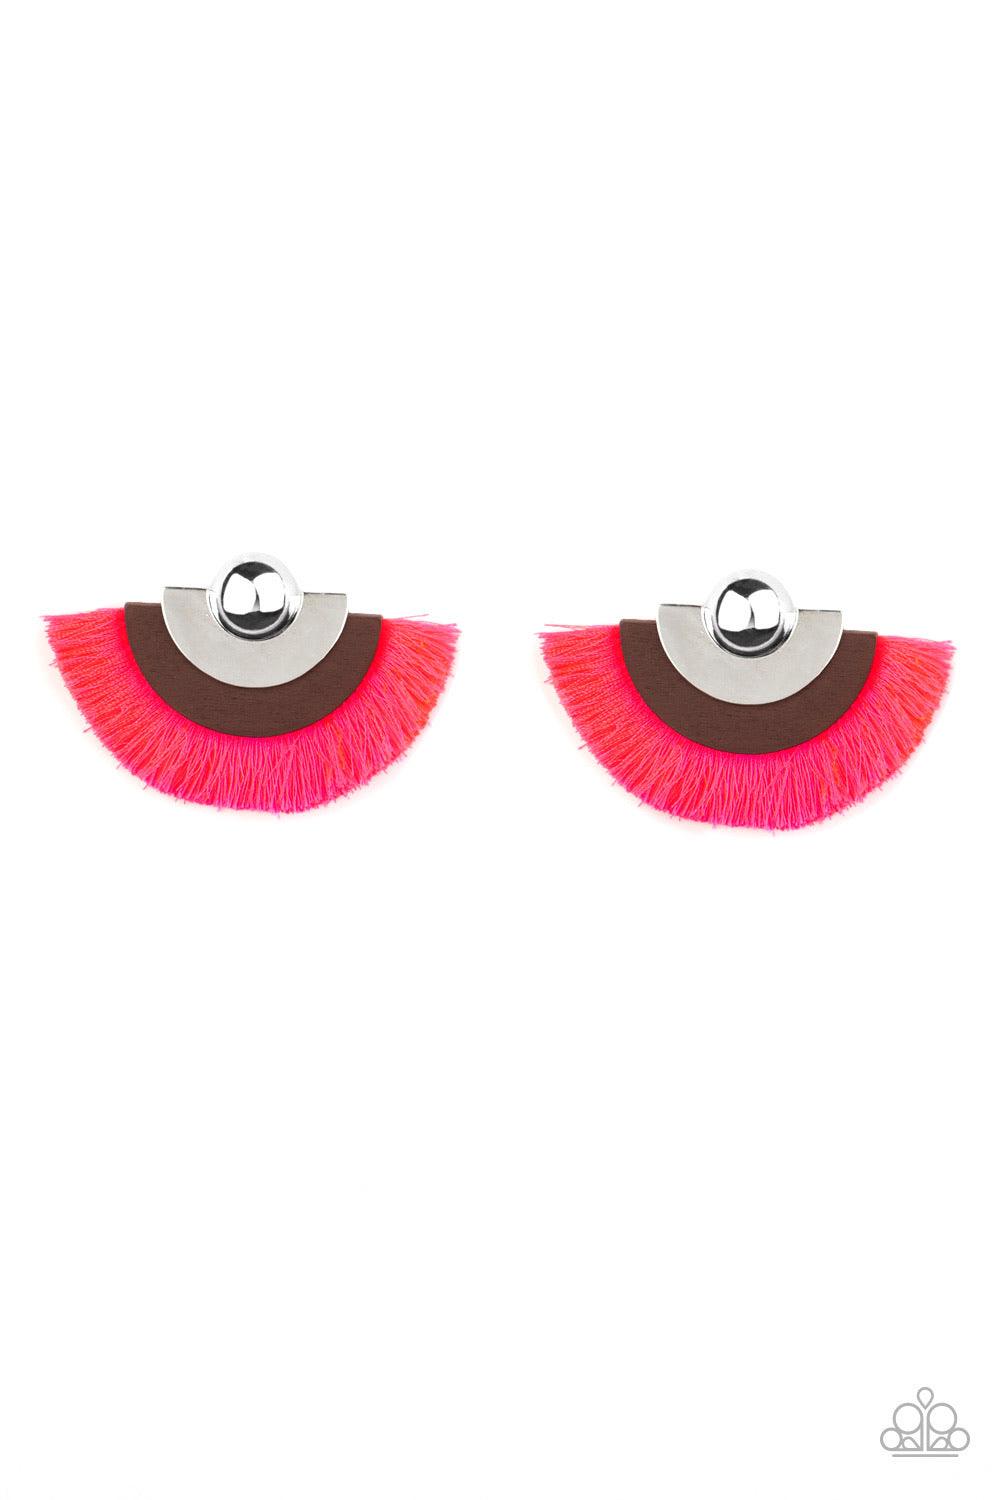 Paparazzi Accessories Fan The FLAMBOYANCE - Pink Neon pink thread fans from the bottom of a retro silver and wooden frame, creating a vivacious fringe. Earring attaches to a standard post fitting. Jewelry